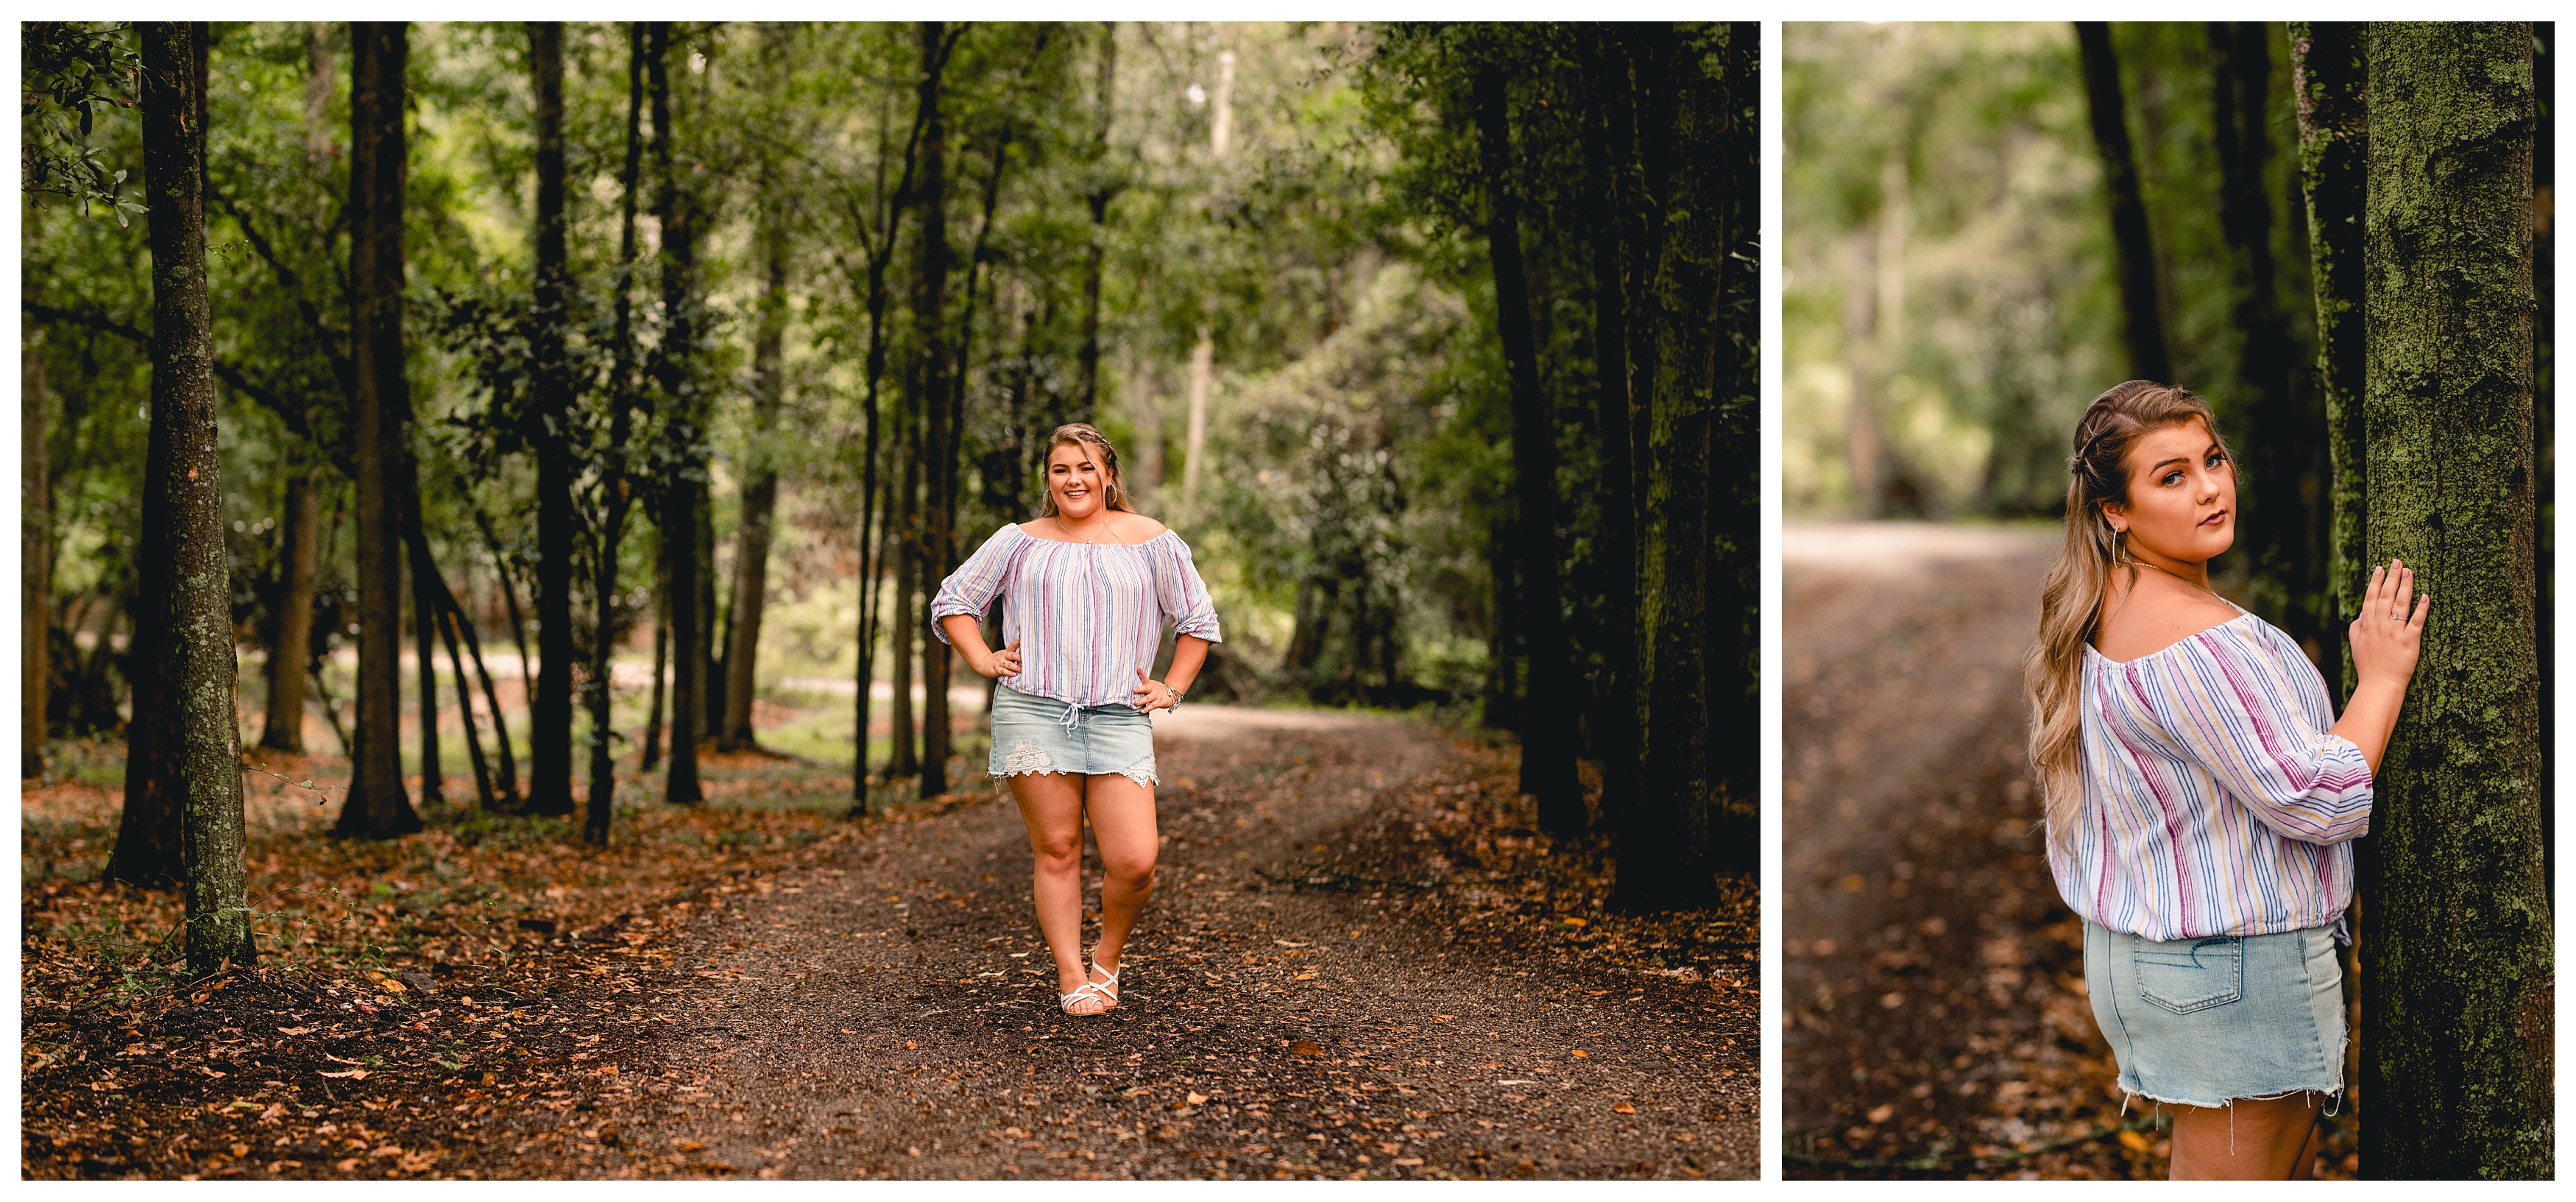 Tallahassee senior portrait photographer girl in wooded driveway. Shelly Williams Photography